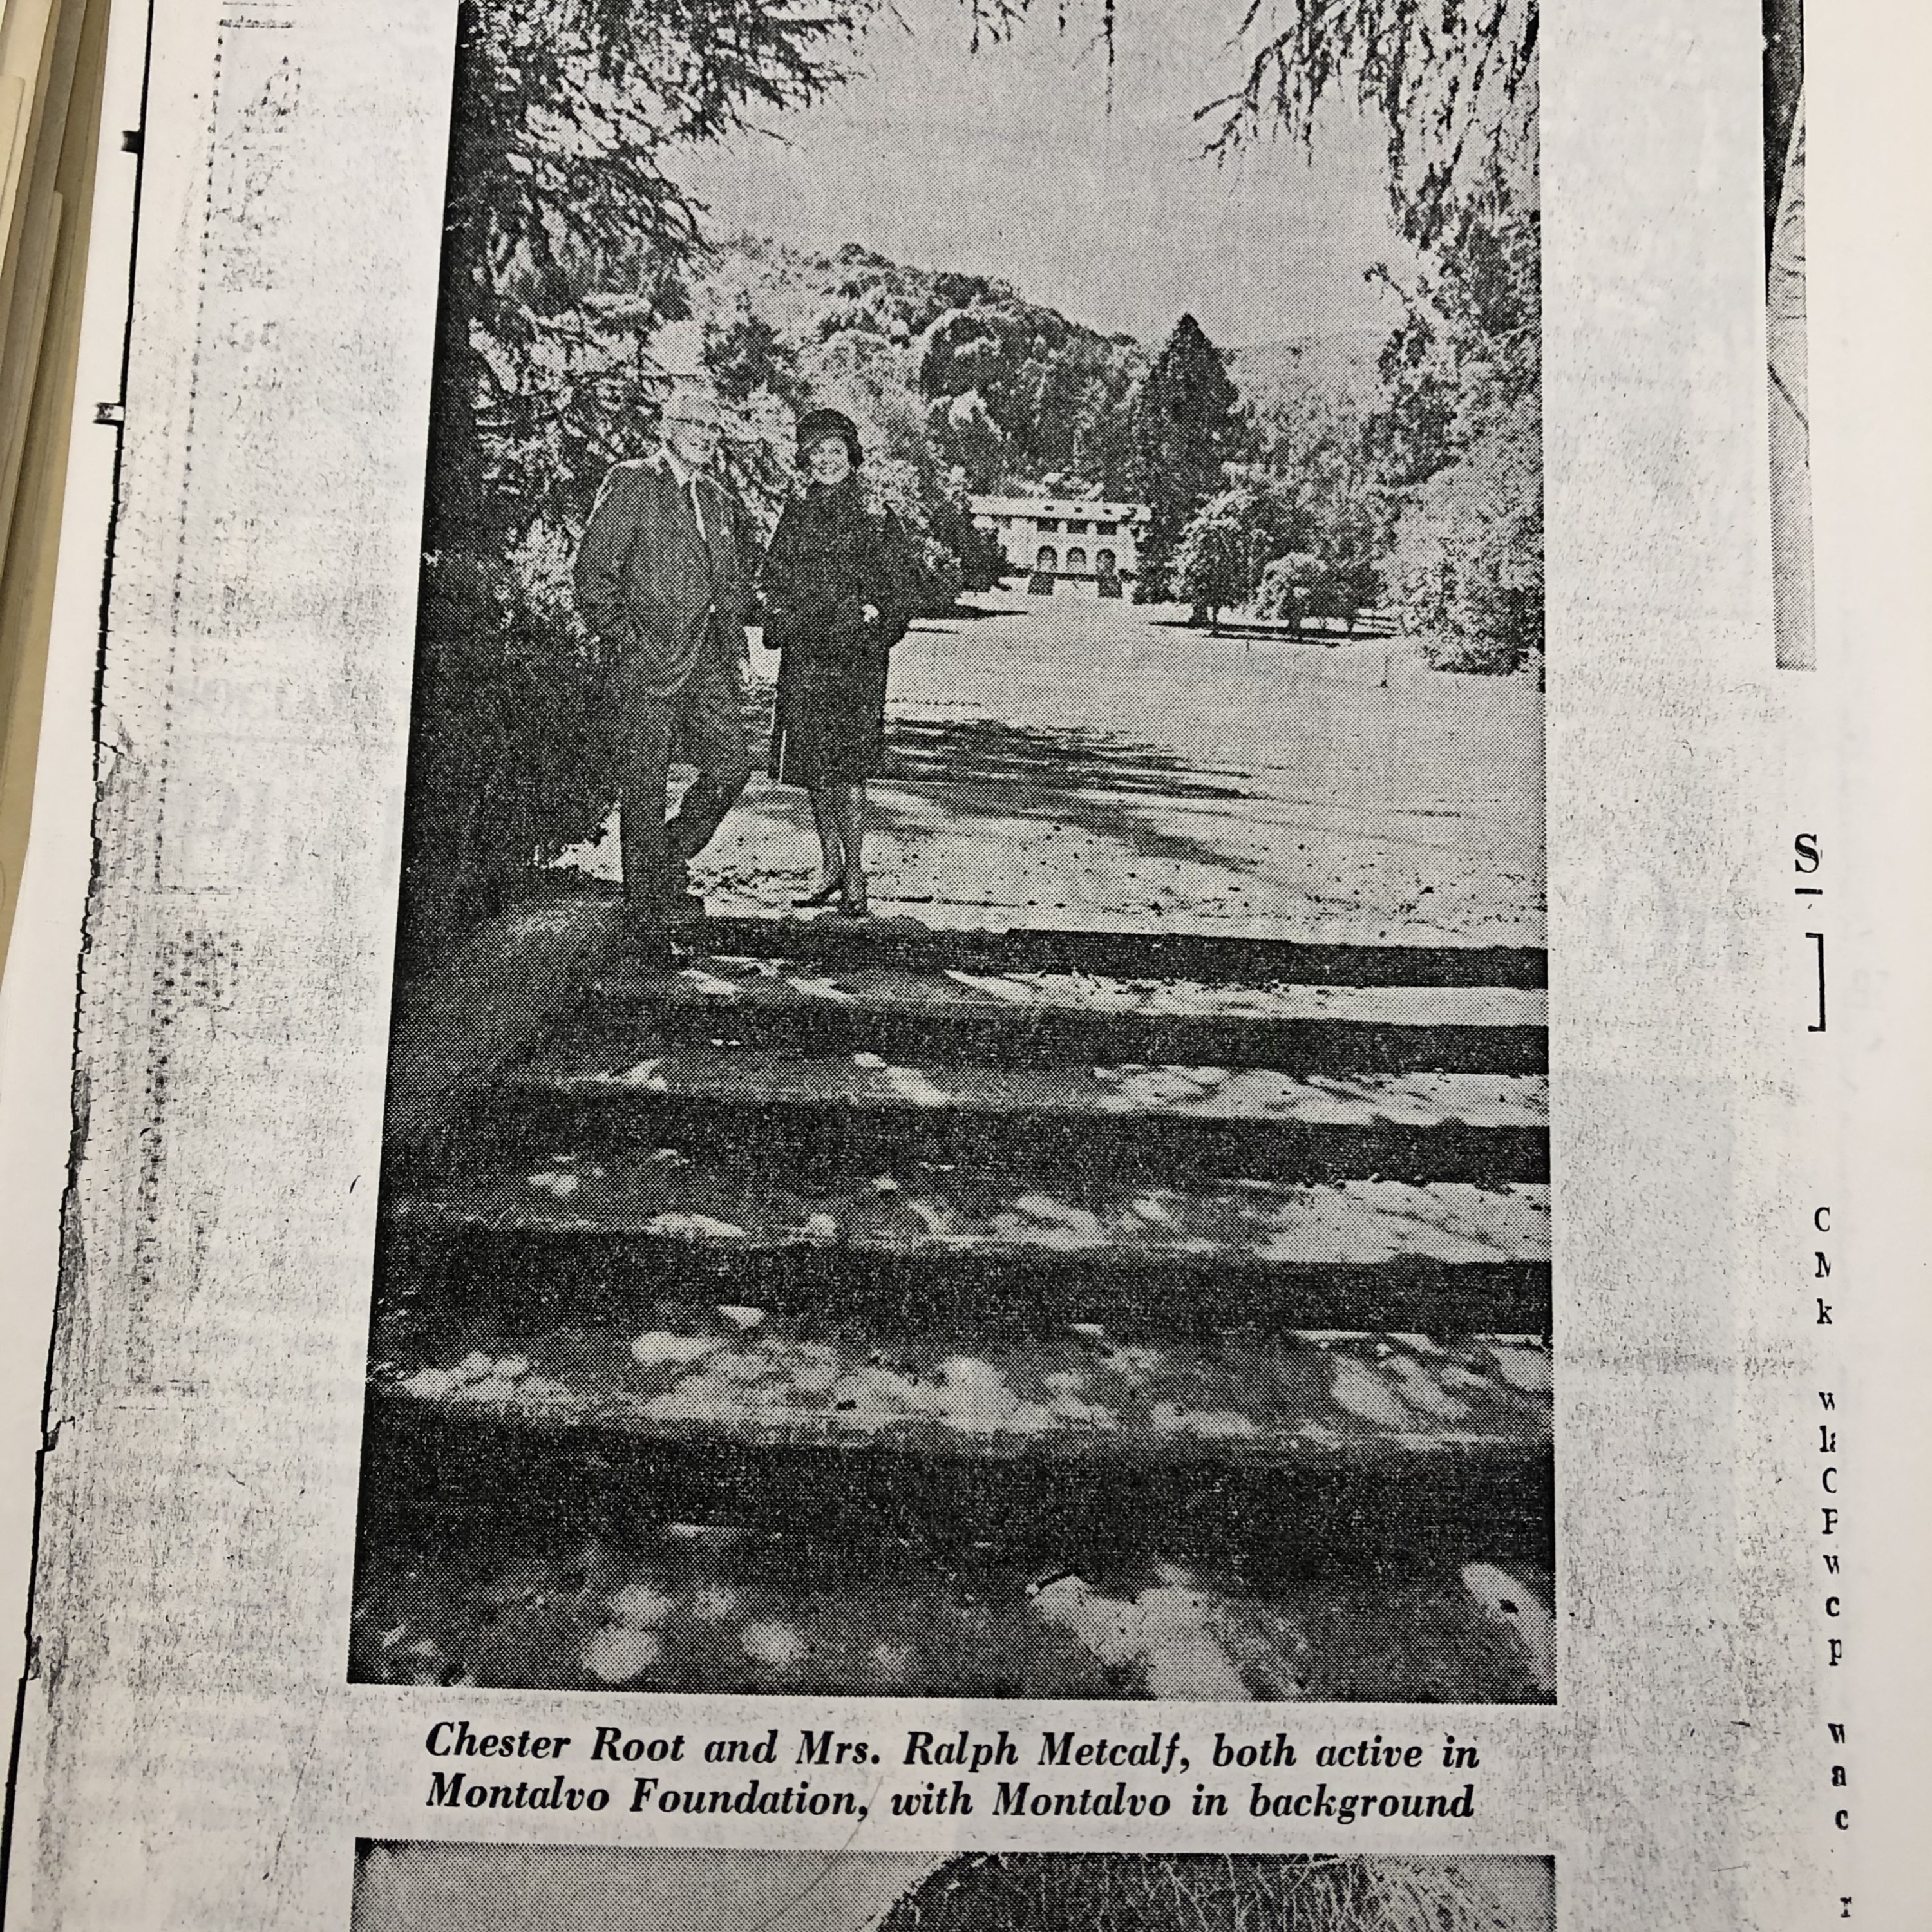 Picture of Chester Root and Mrs. Ralph Metcalf at Montalvo.